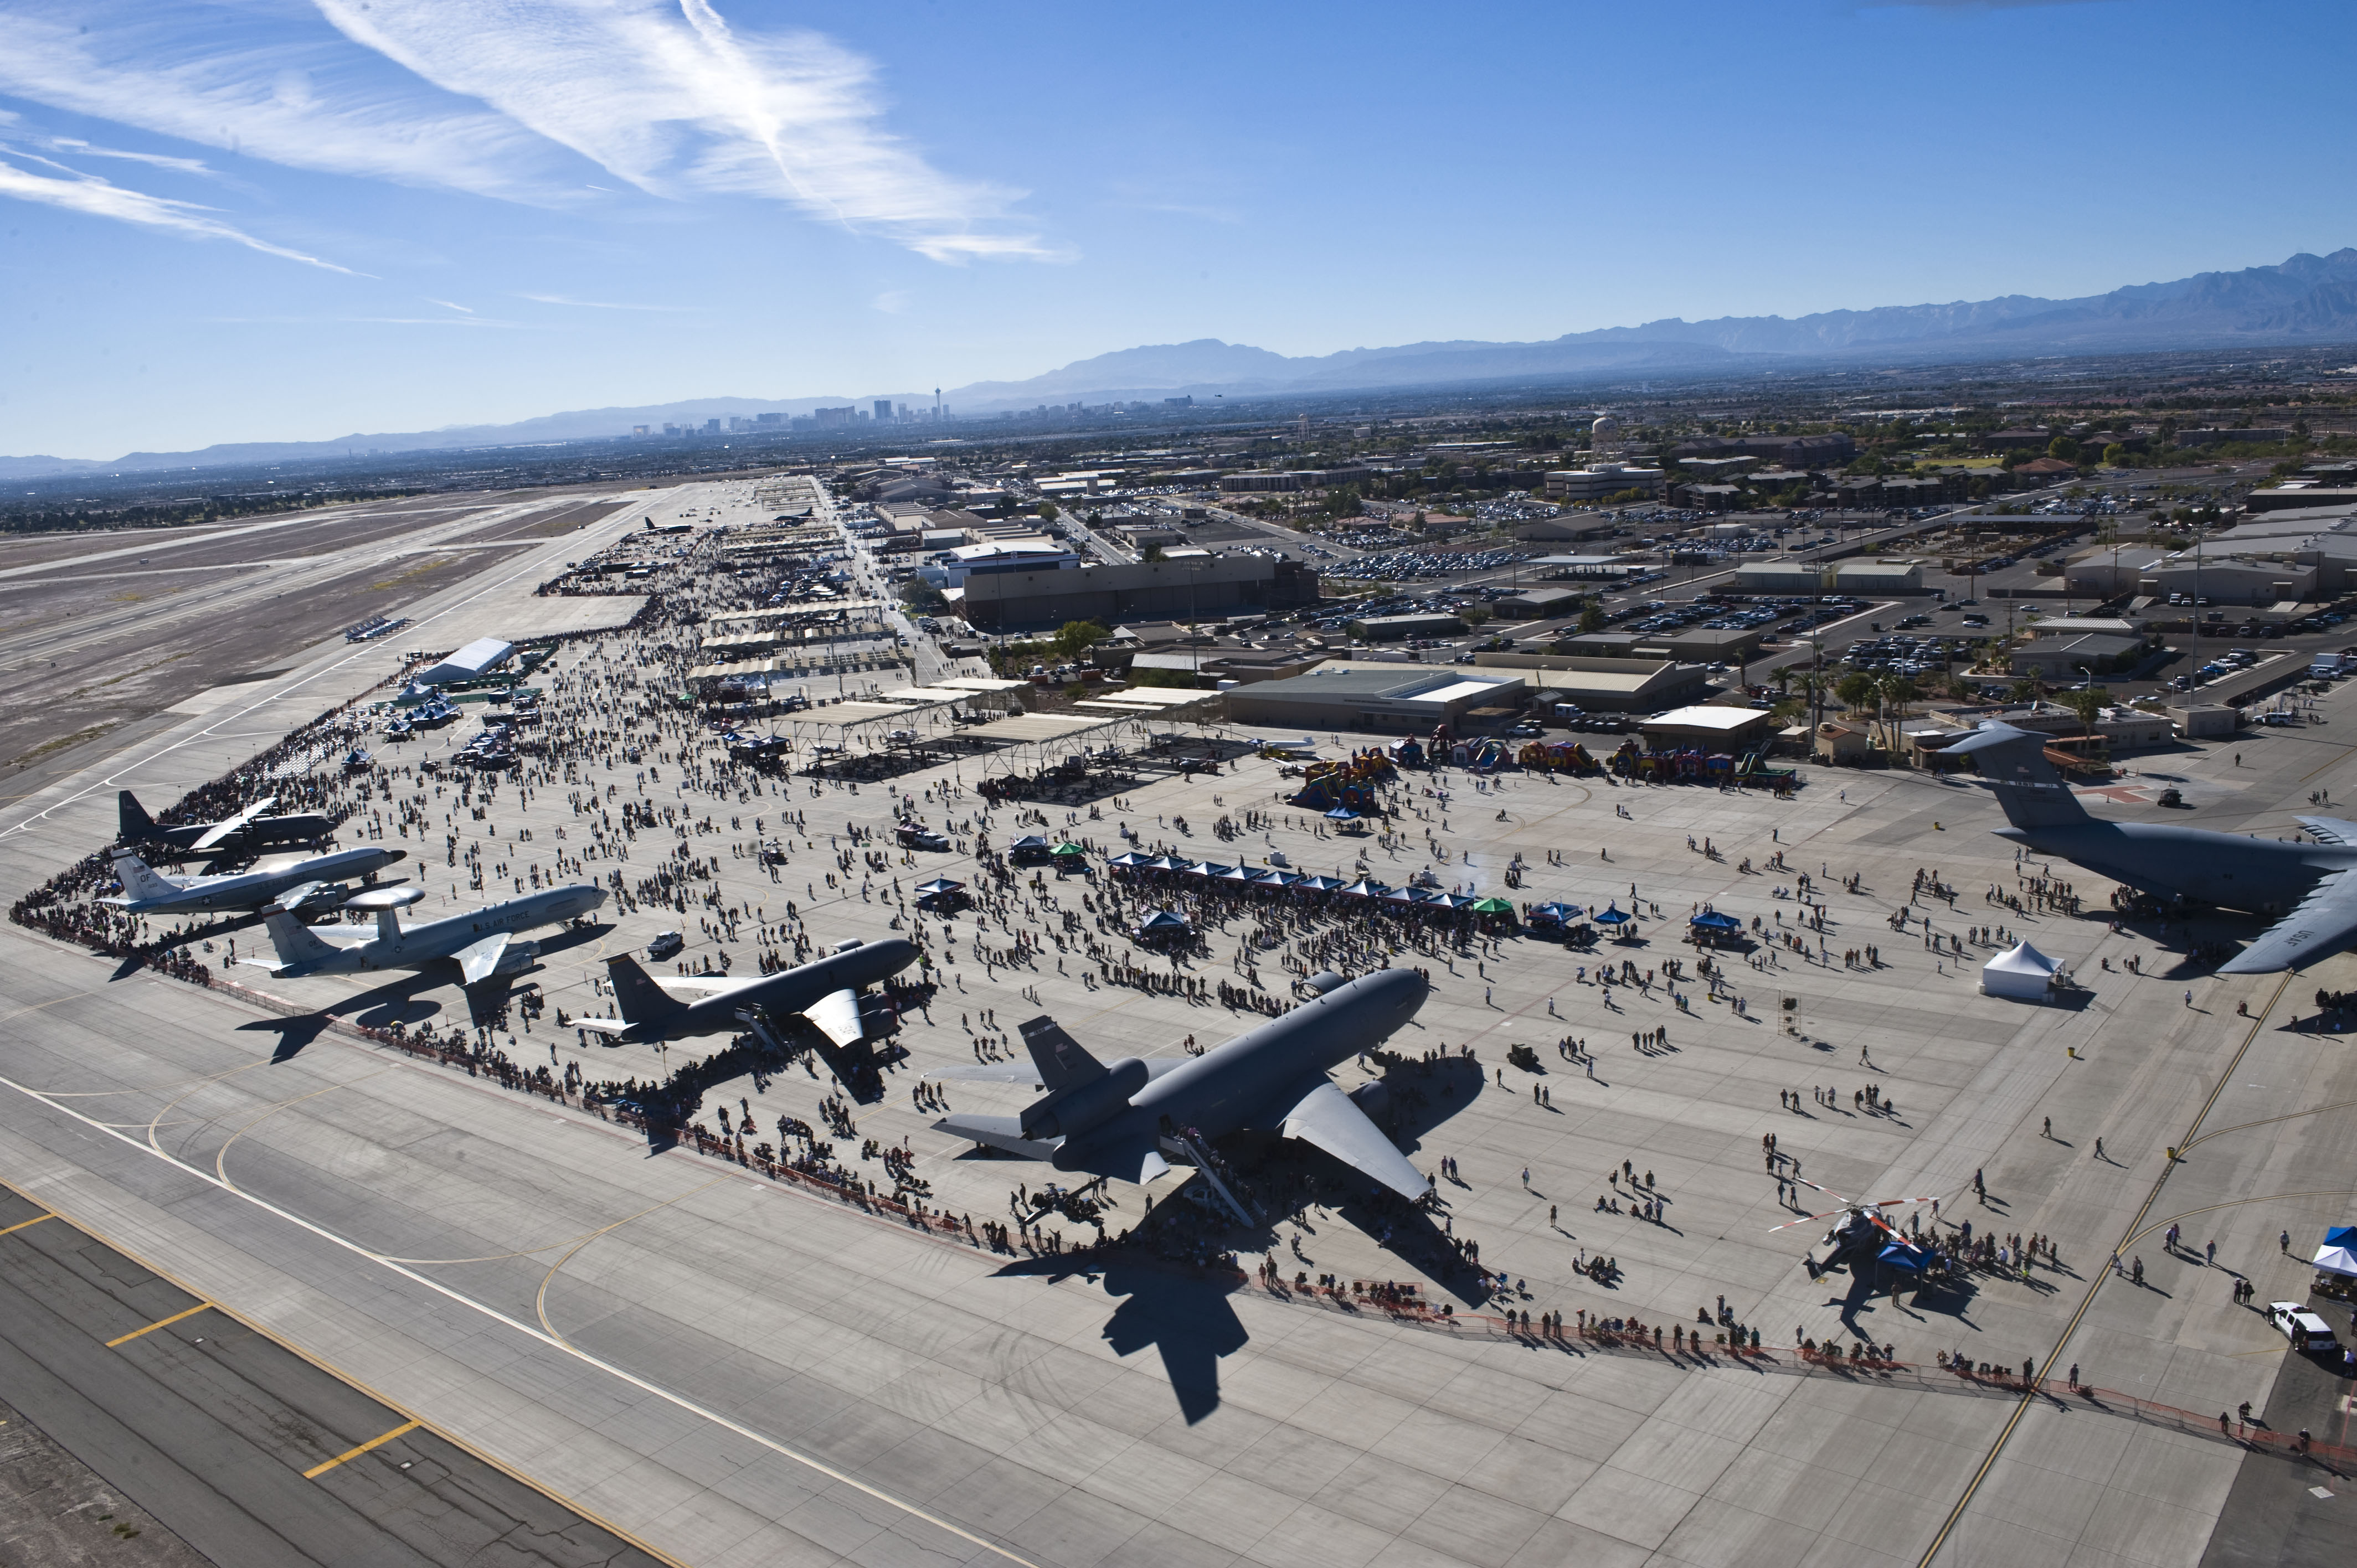 assignments nellis afb